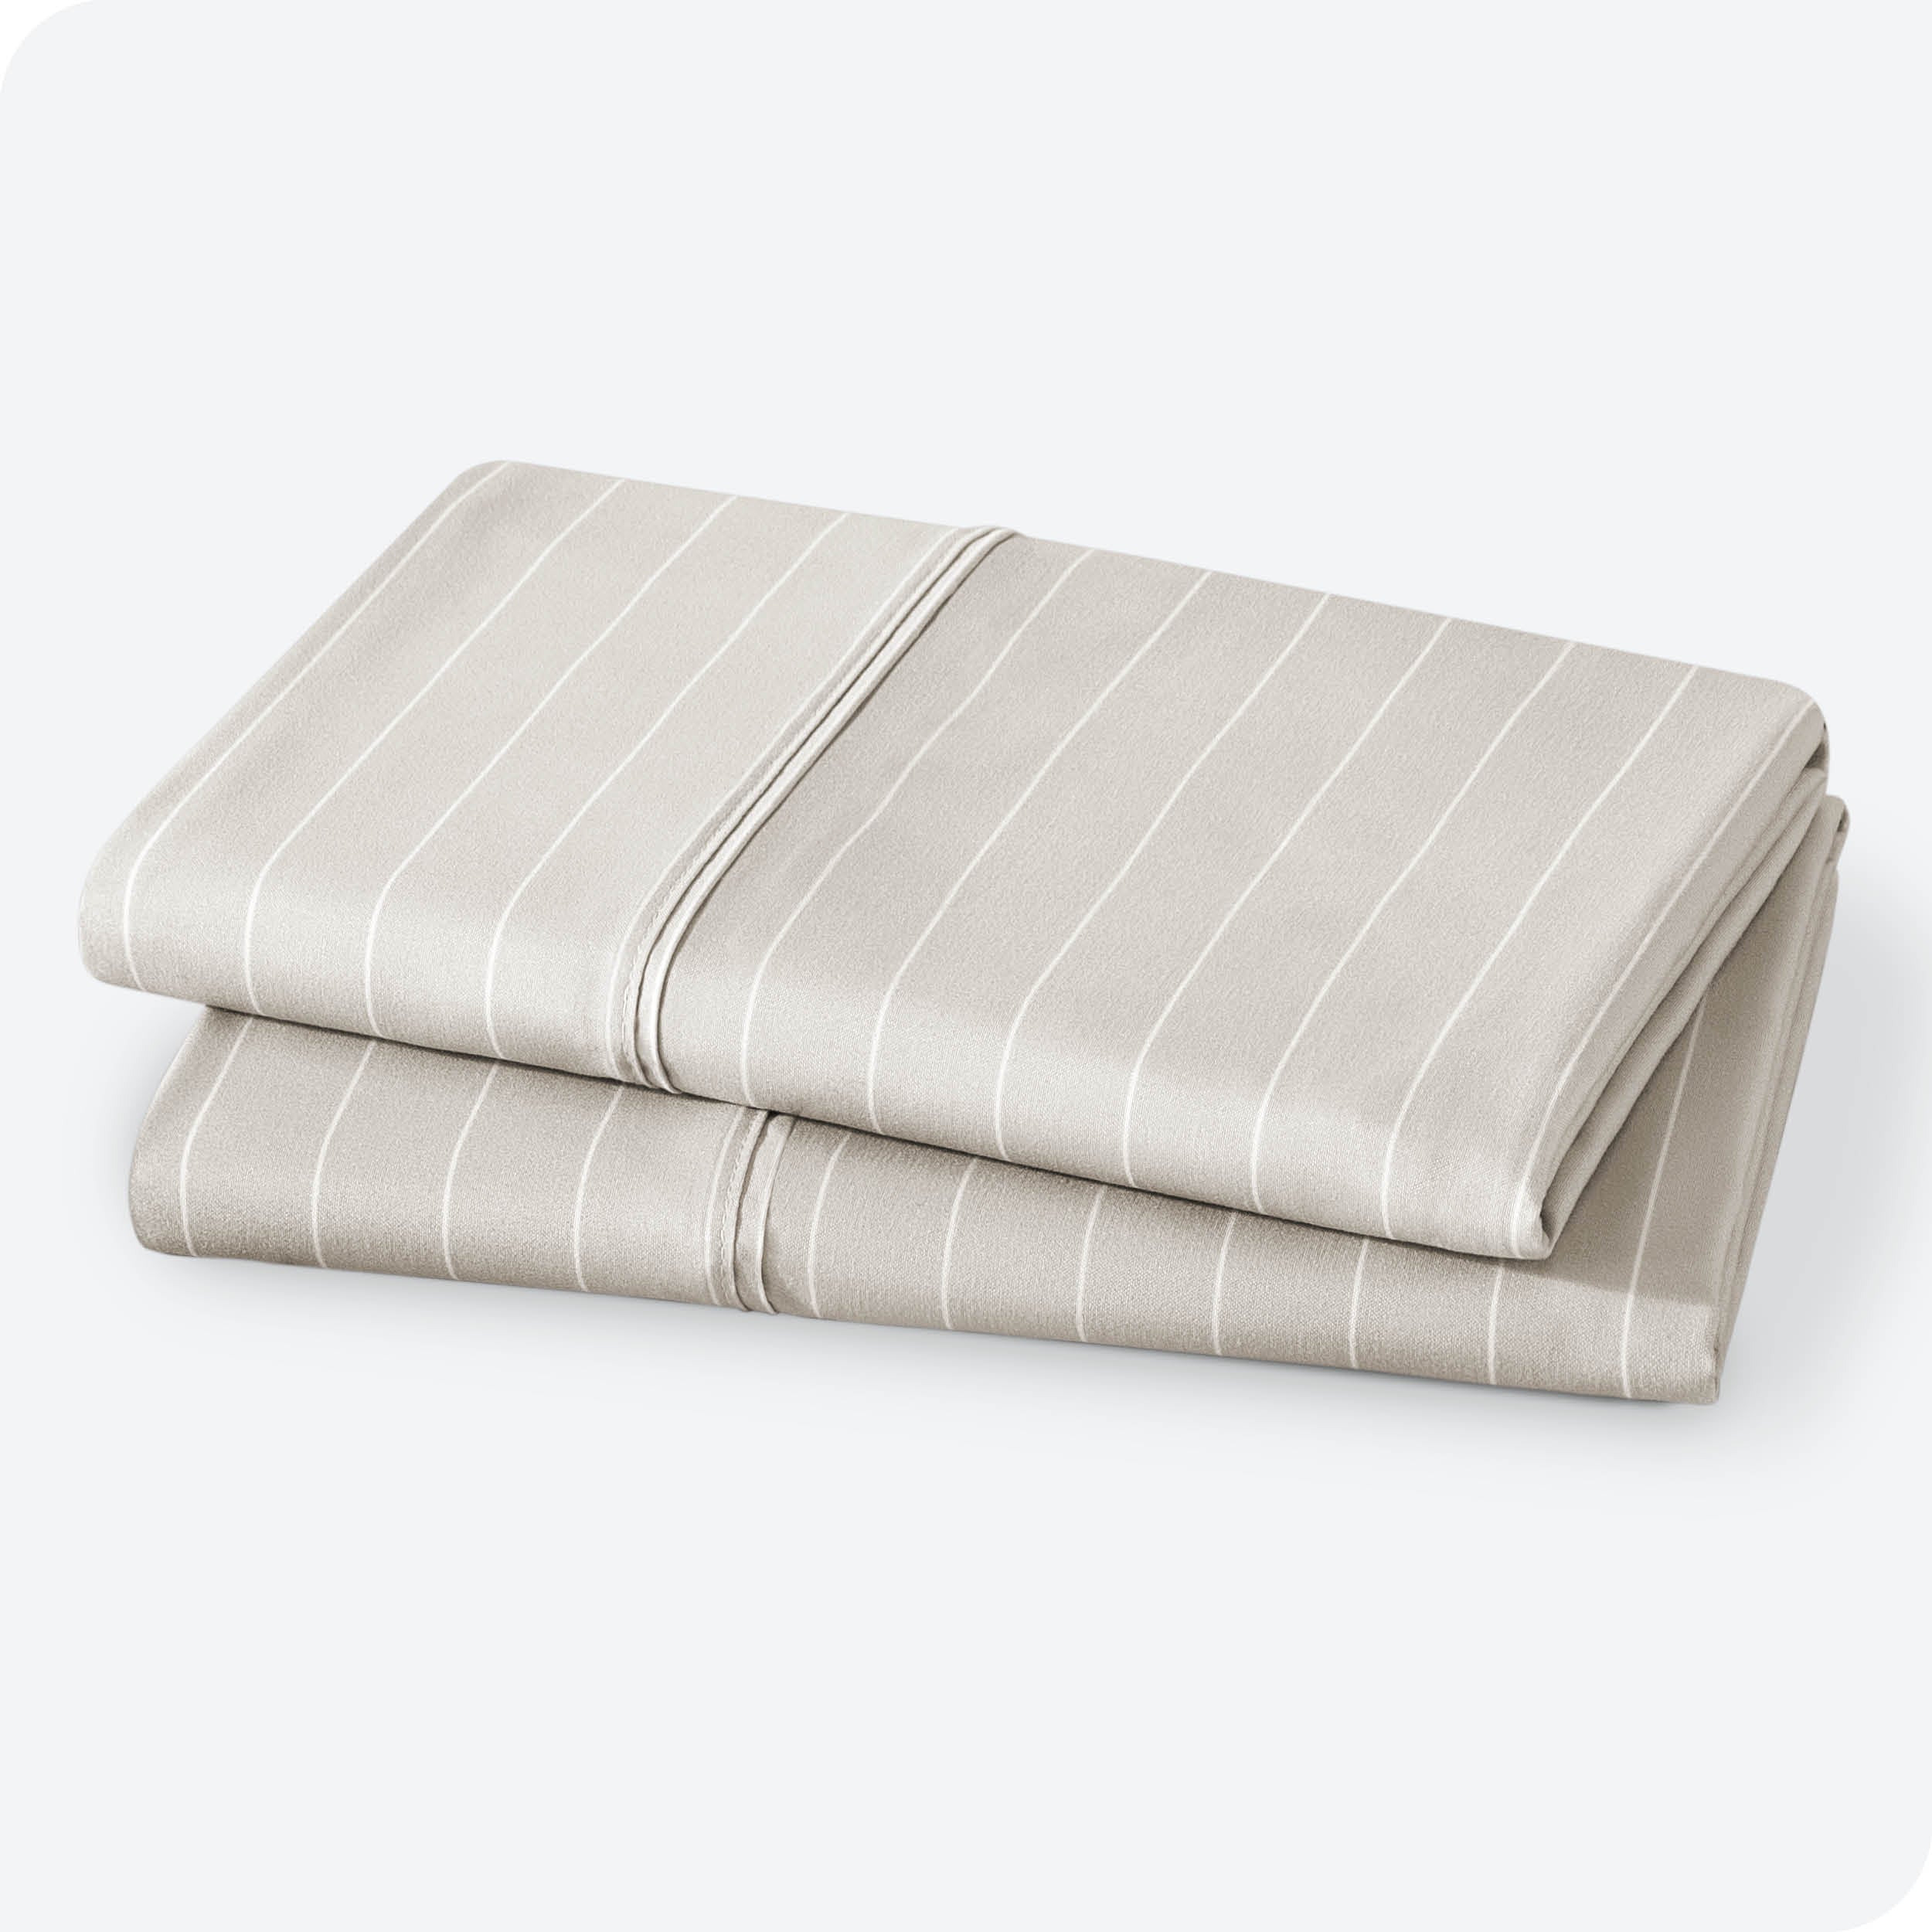 Two pillowcases folded and stacked